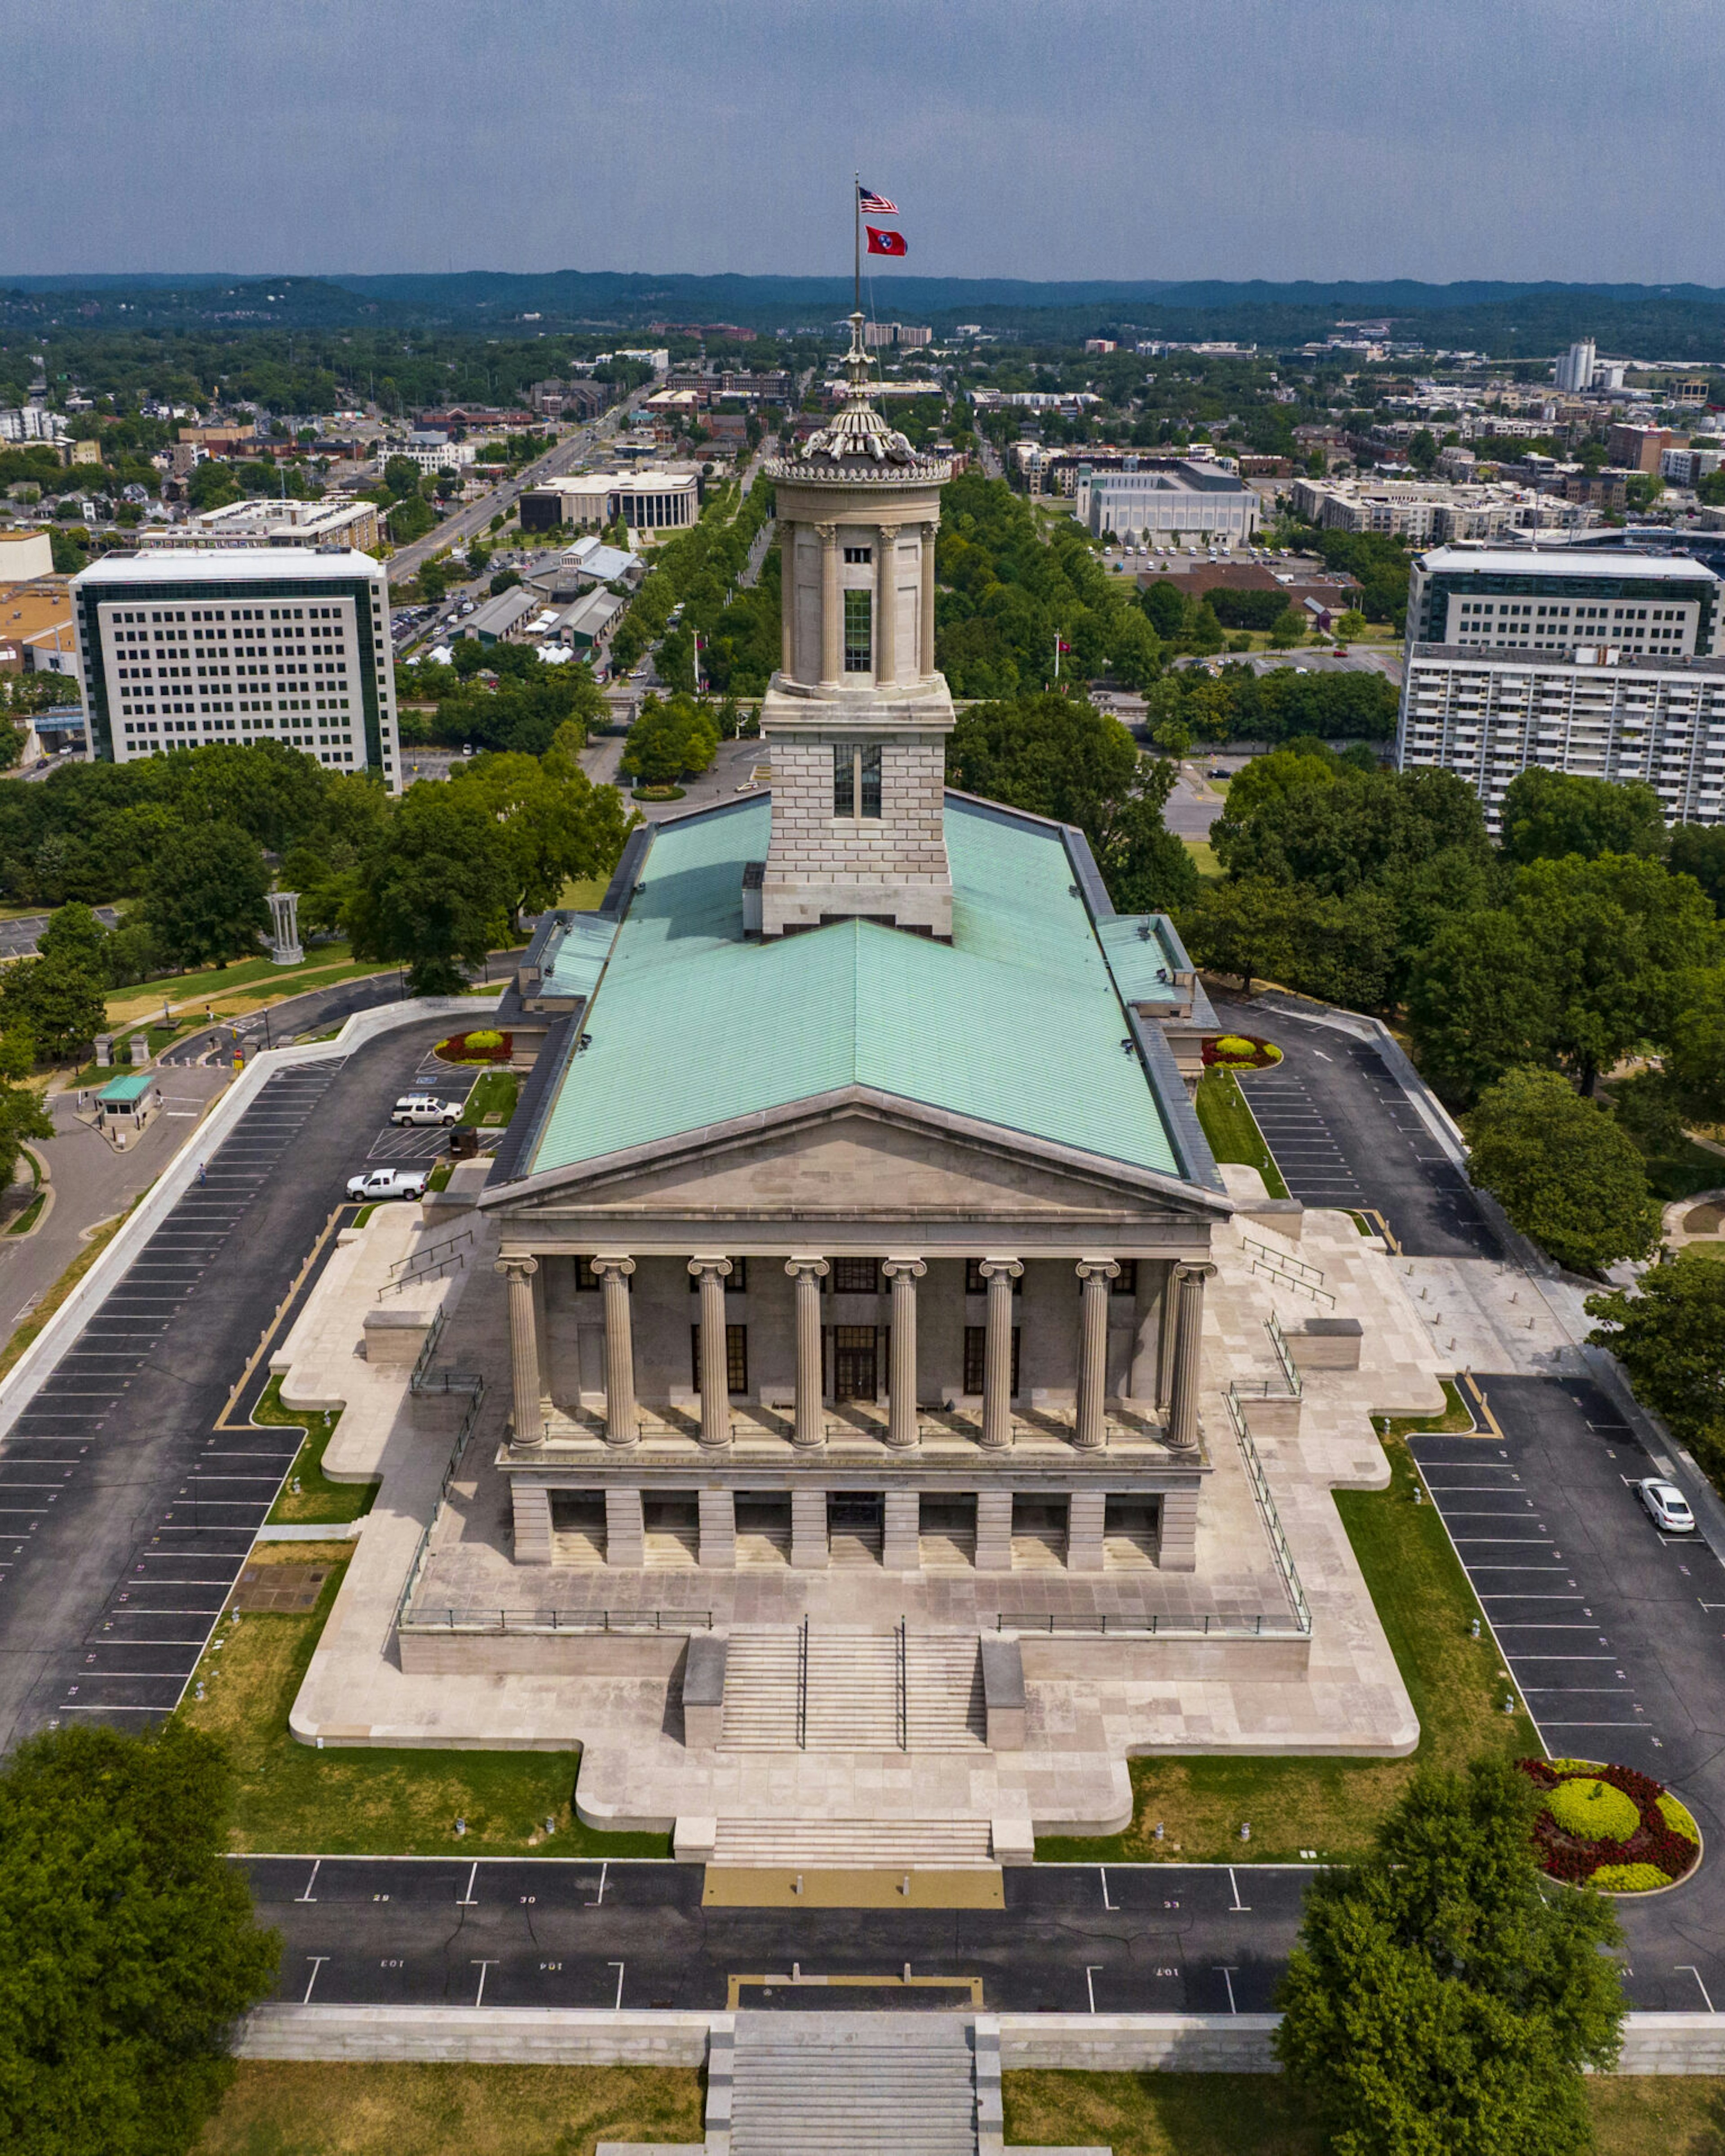 Drone view of Tennessee State Capitol. (Photo by: Joe Sohm/Visions of America/Universal Images Group via Getty Images)